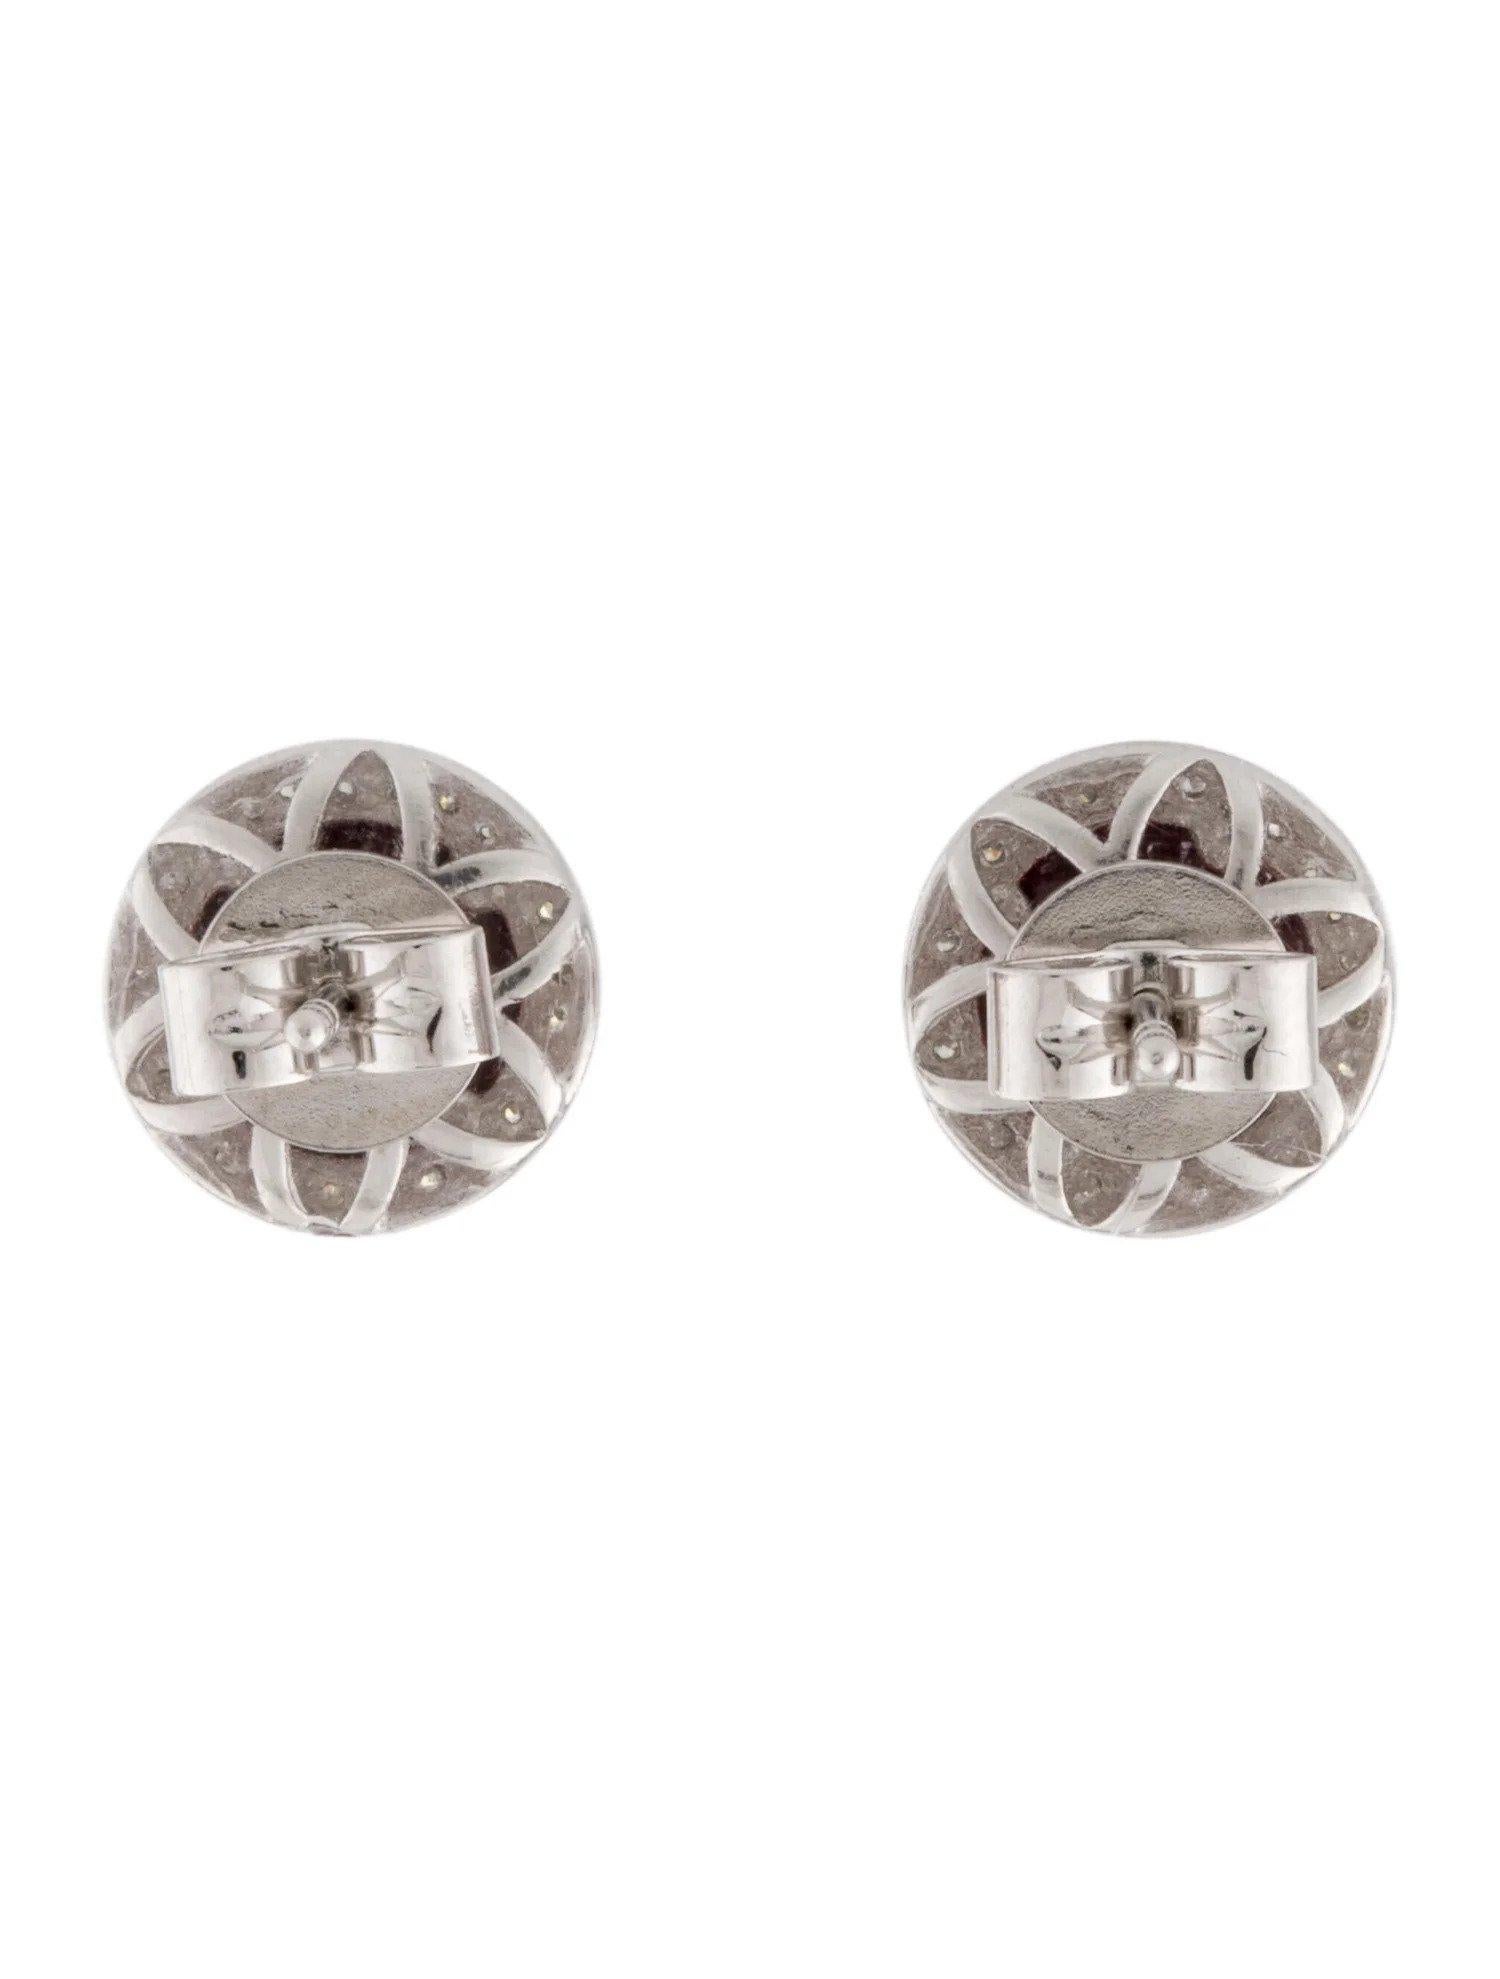 2.95 Carat Round Garnet & Diamond White Gold Stud Earrings  In New Condition For Sale In Great Neck, NY